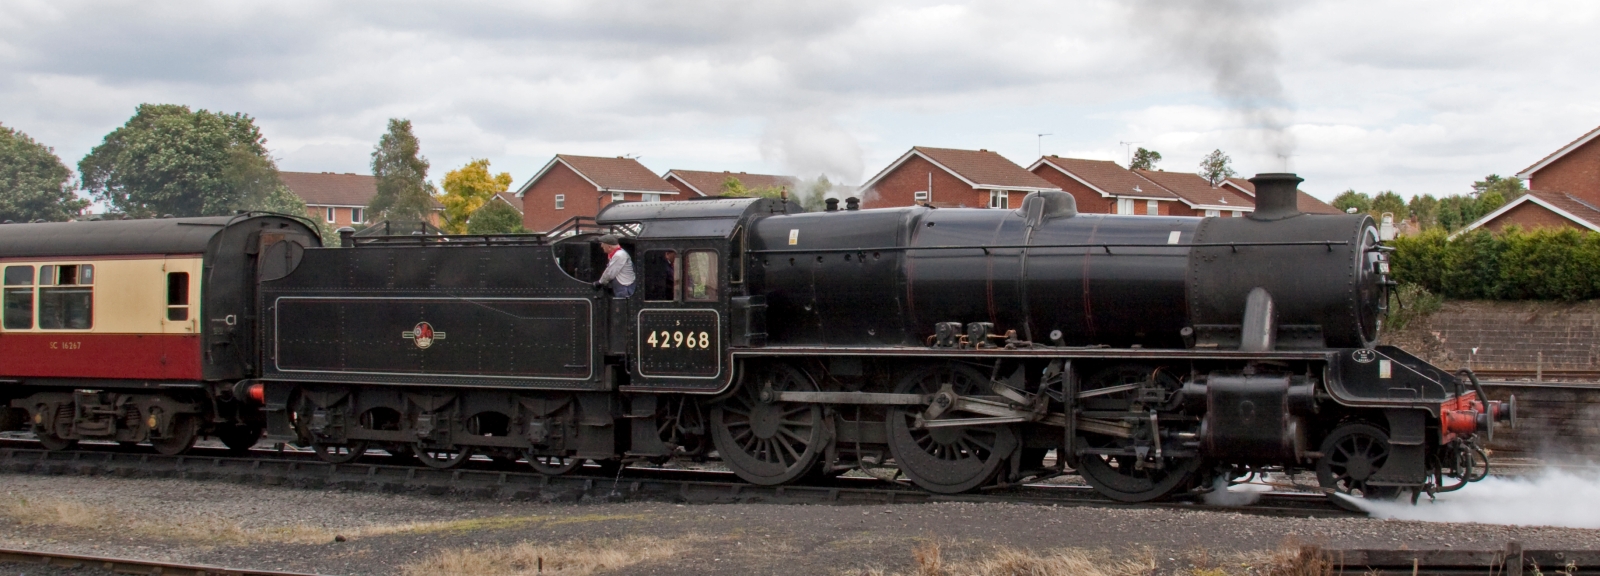 Preserved No. 42968 in 2009 at Kidderminster